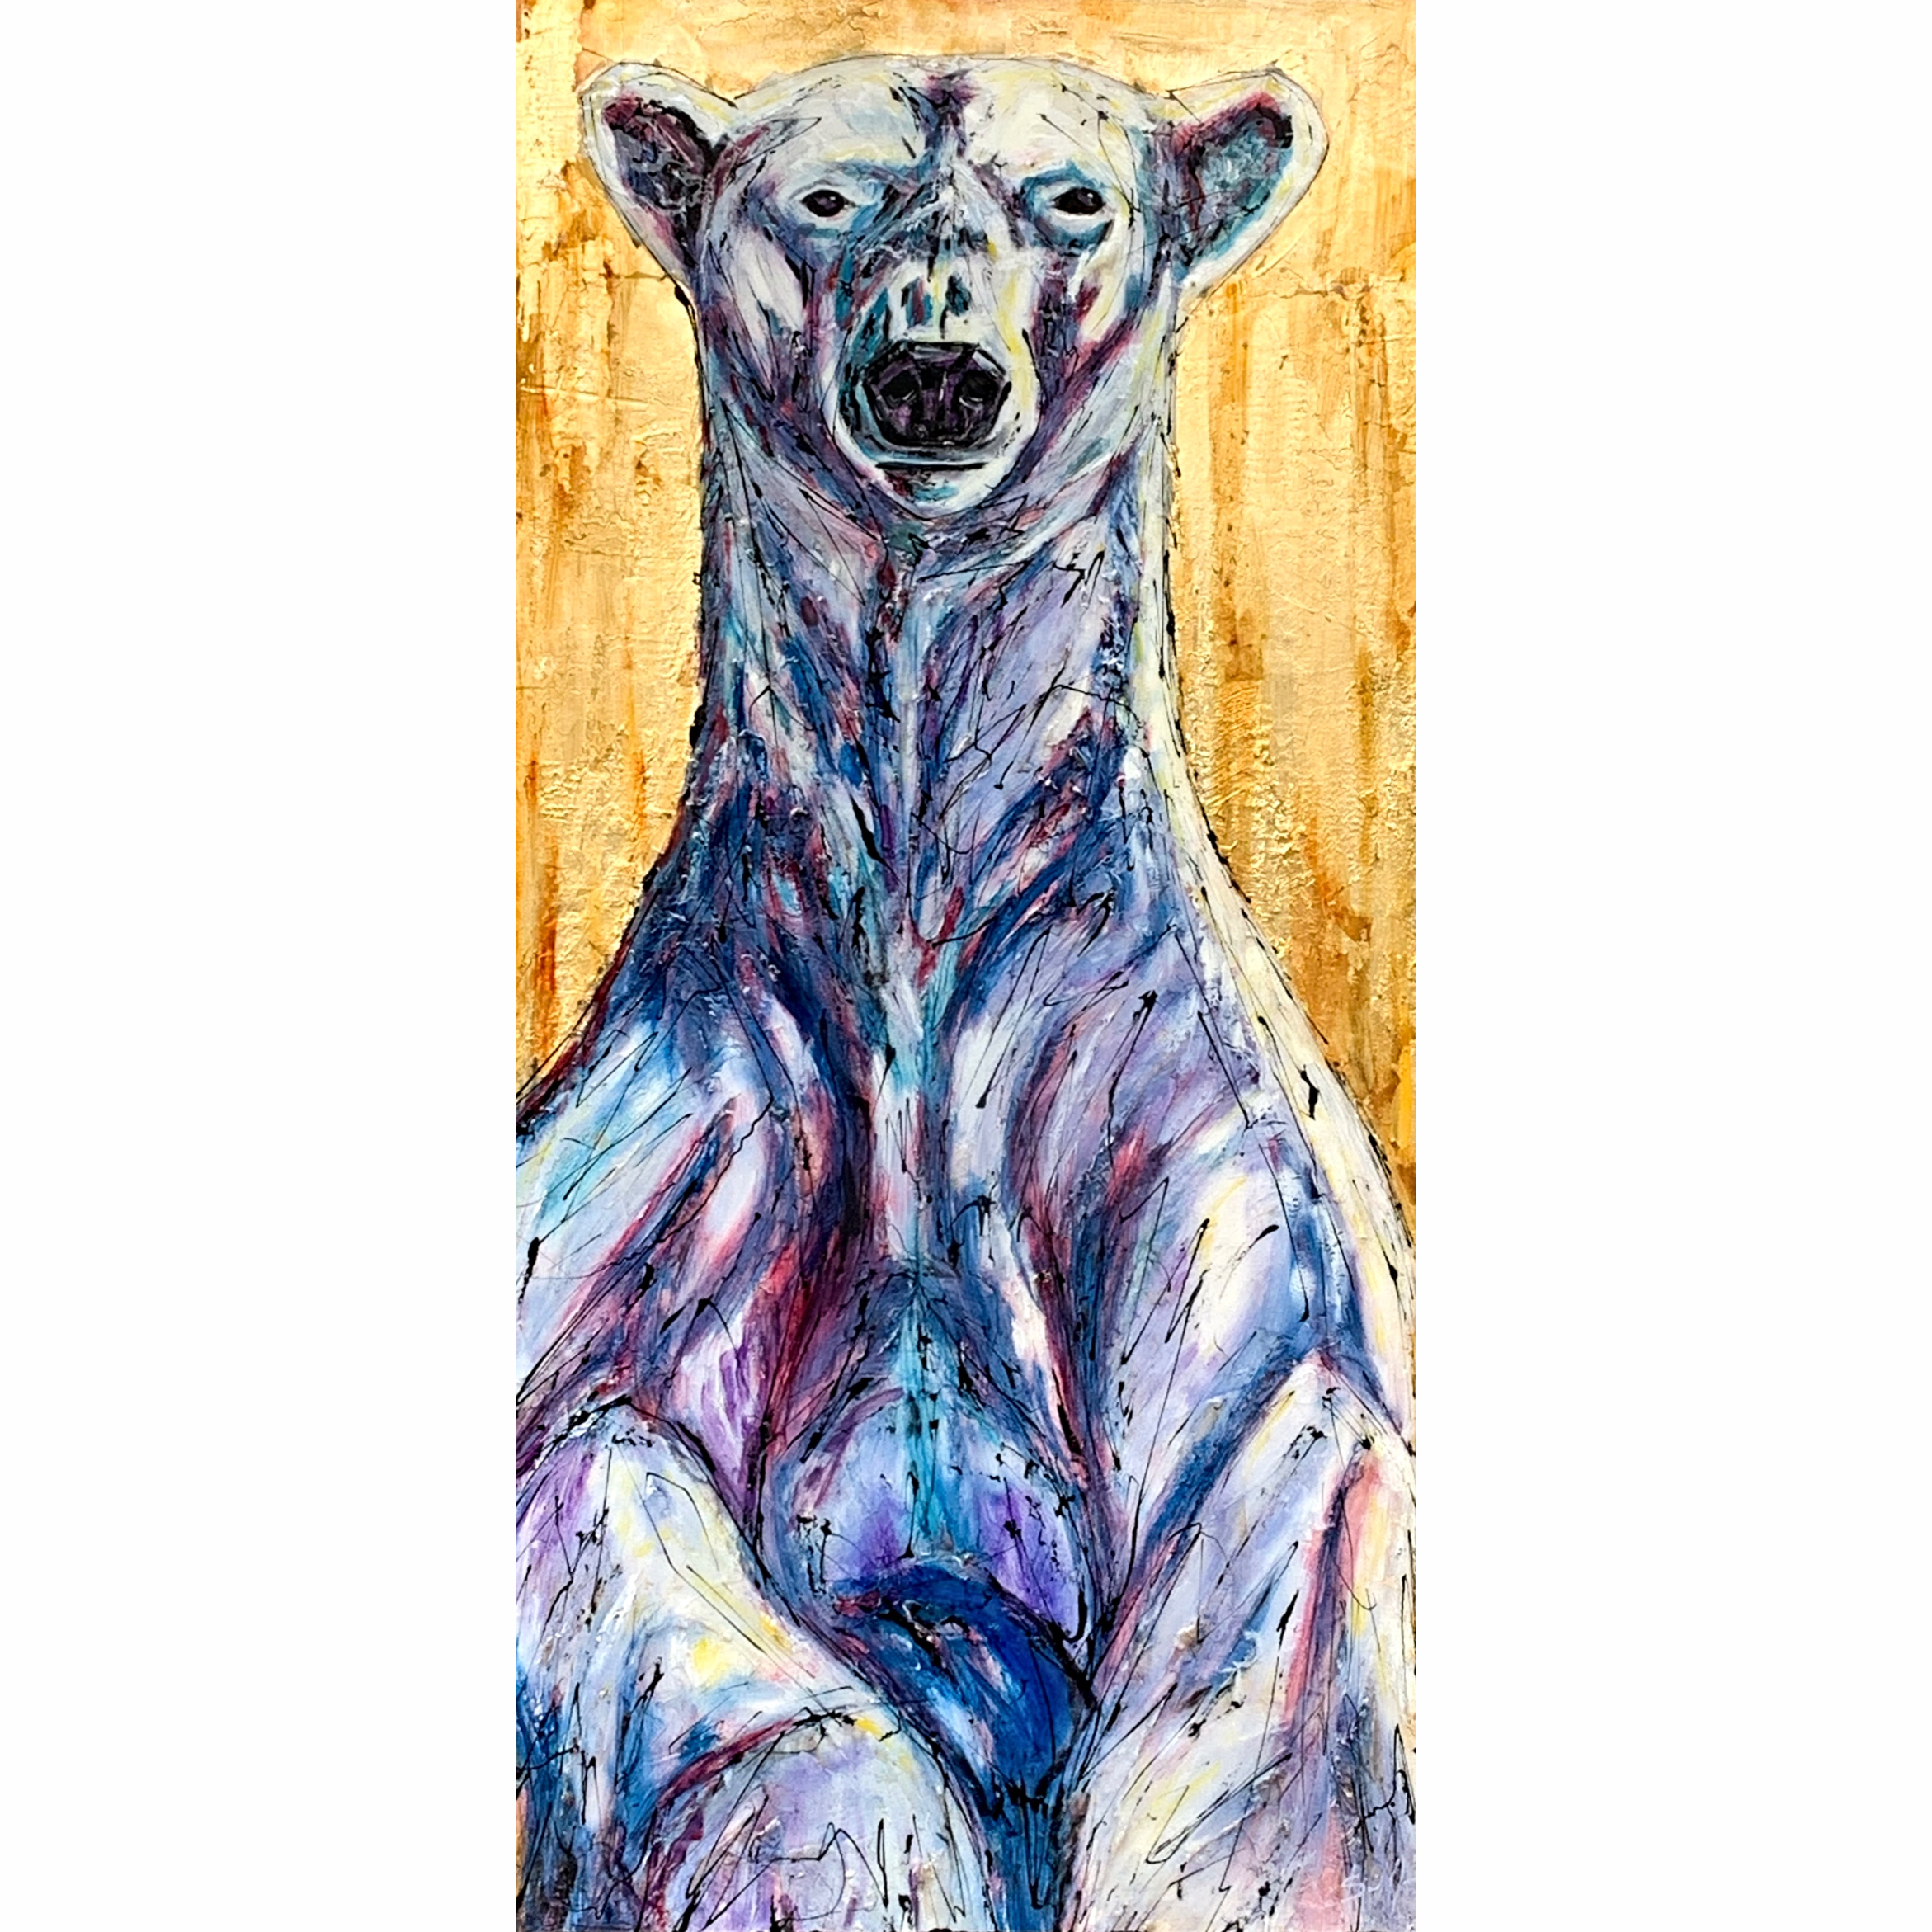 Fire & Ice, mixed media polar bear painting by David Zimmerman | Effusion Art Gallery + Cast Glass Studio, Invermere BC